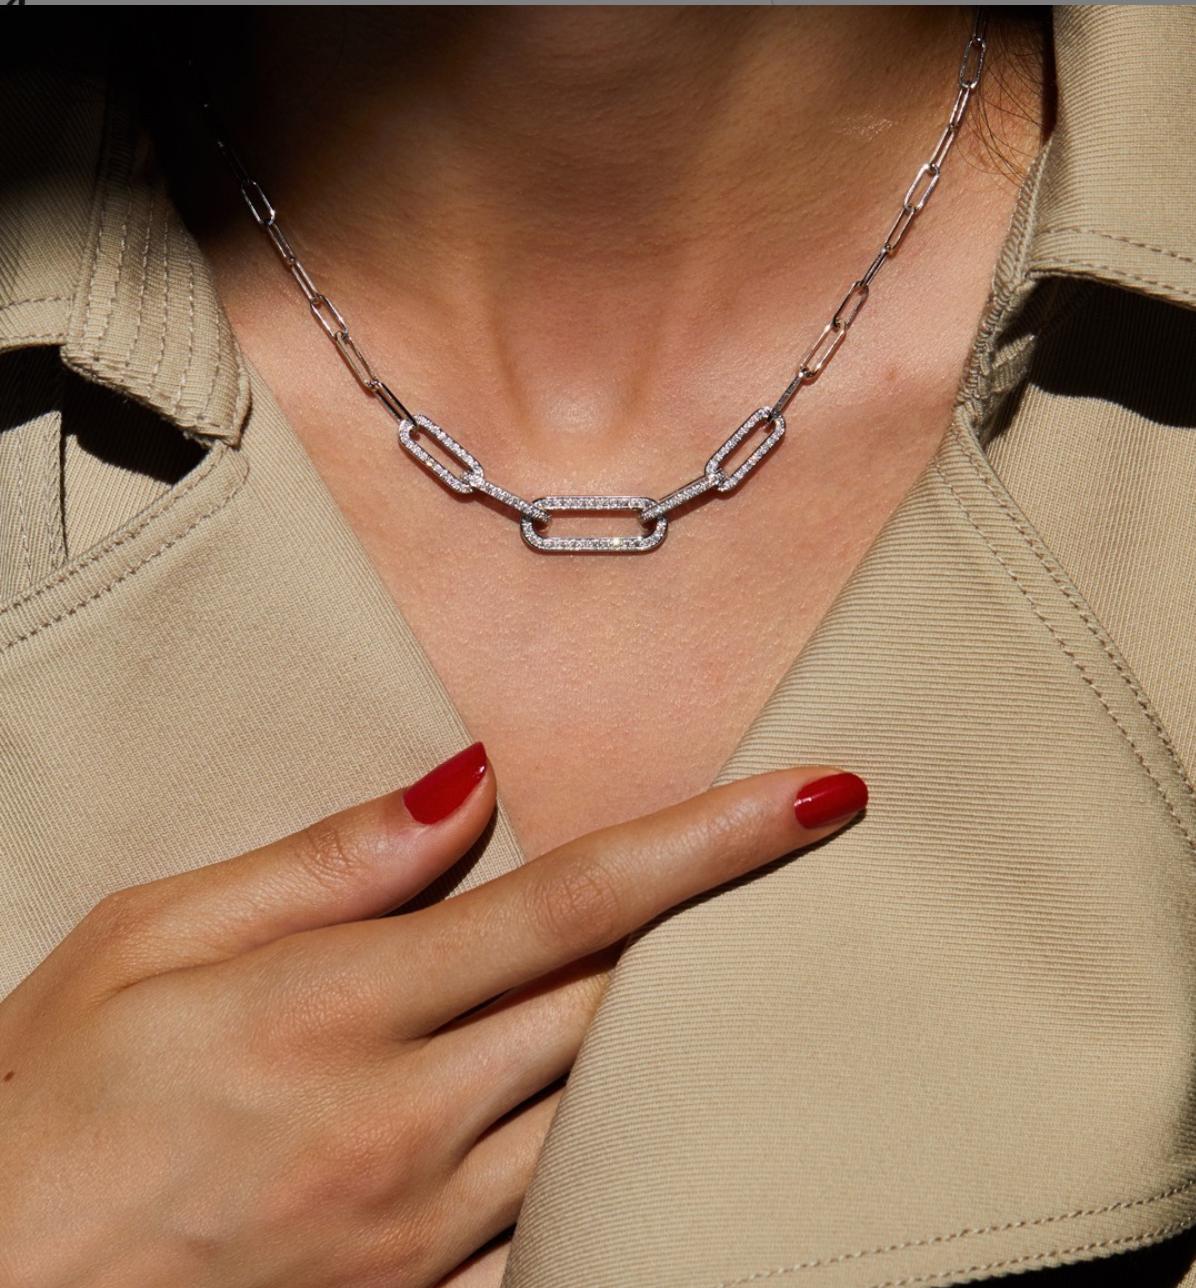 18 karat white gold necklace made by the French jeweller Dinh van.

The simplicity of a shape, Dinh Van's creative touch. This Maillon necklace opts for refinement. Graduated links, 5 links are set with 0.81ct carats of diamonds.

Total length of